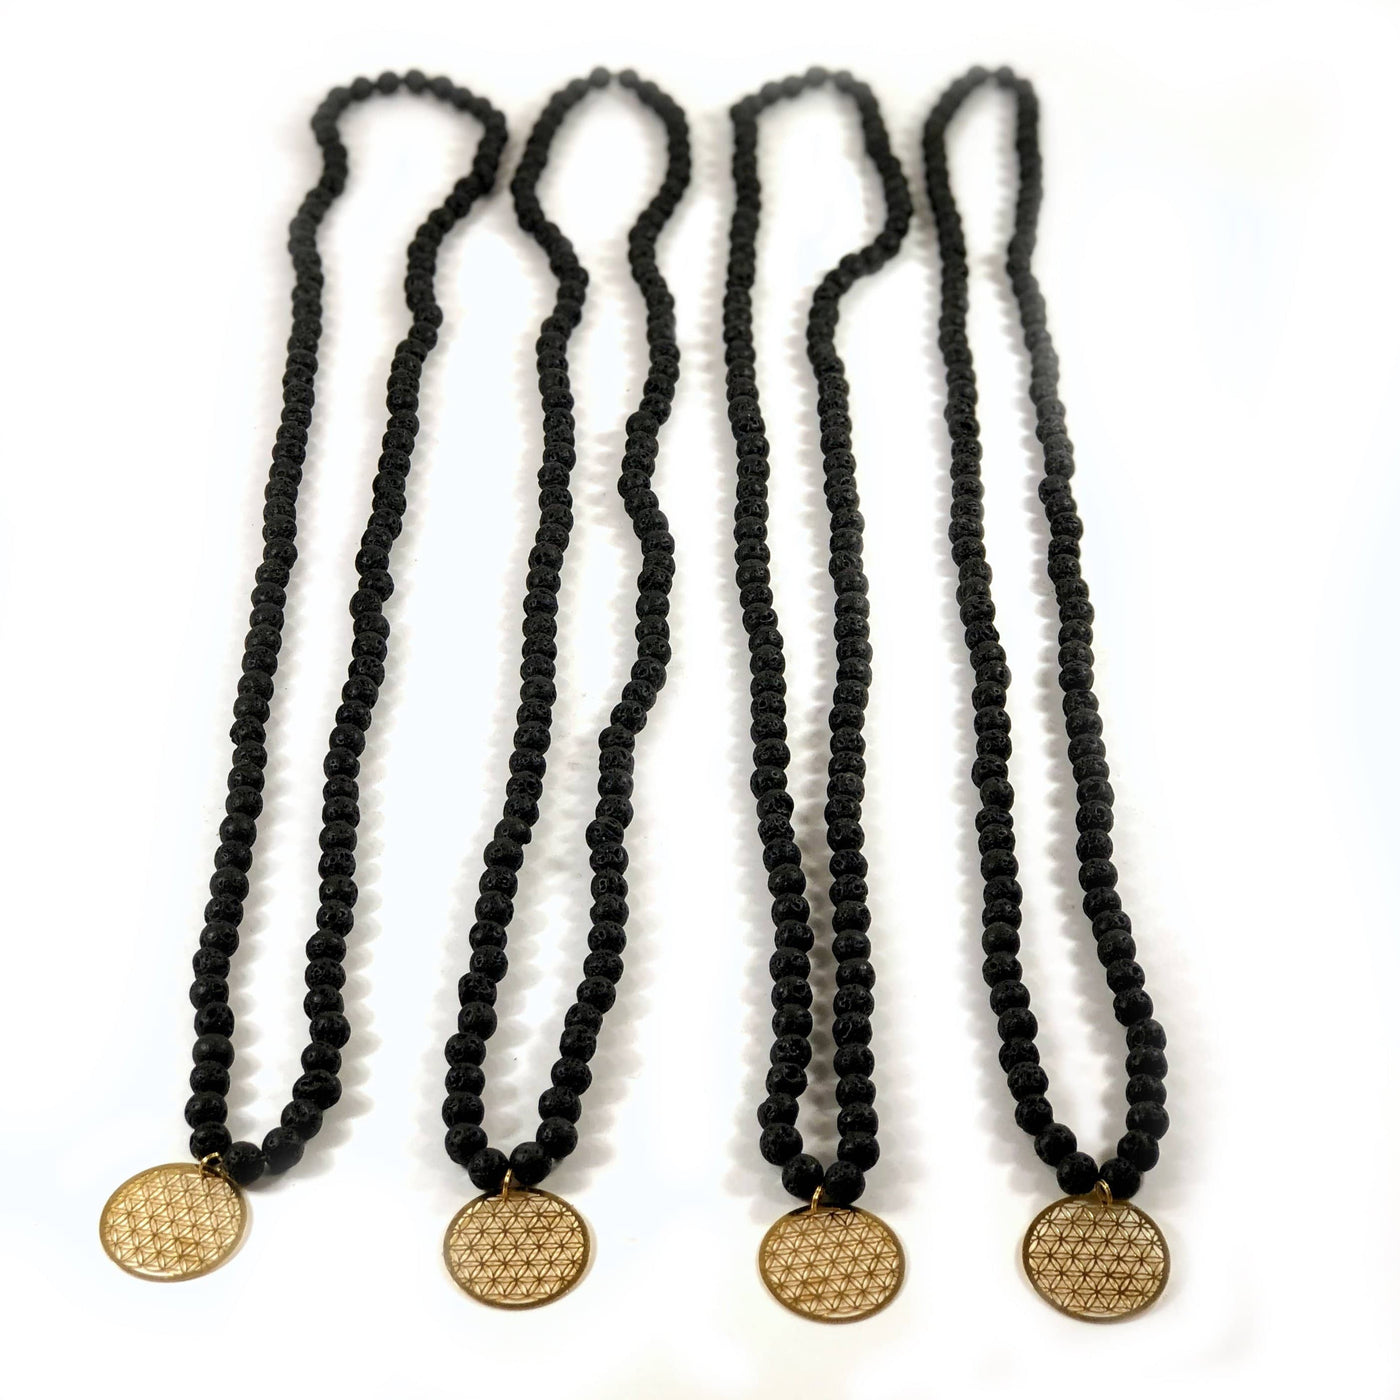 4 Diffuser Necklace Lava Bead with Flower of Life Charm in Gold on White Background.